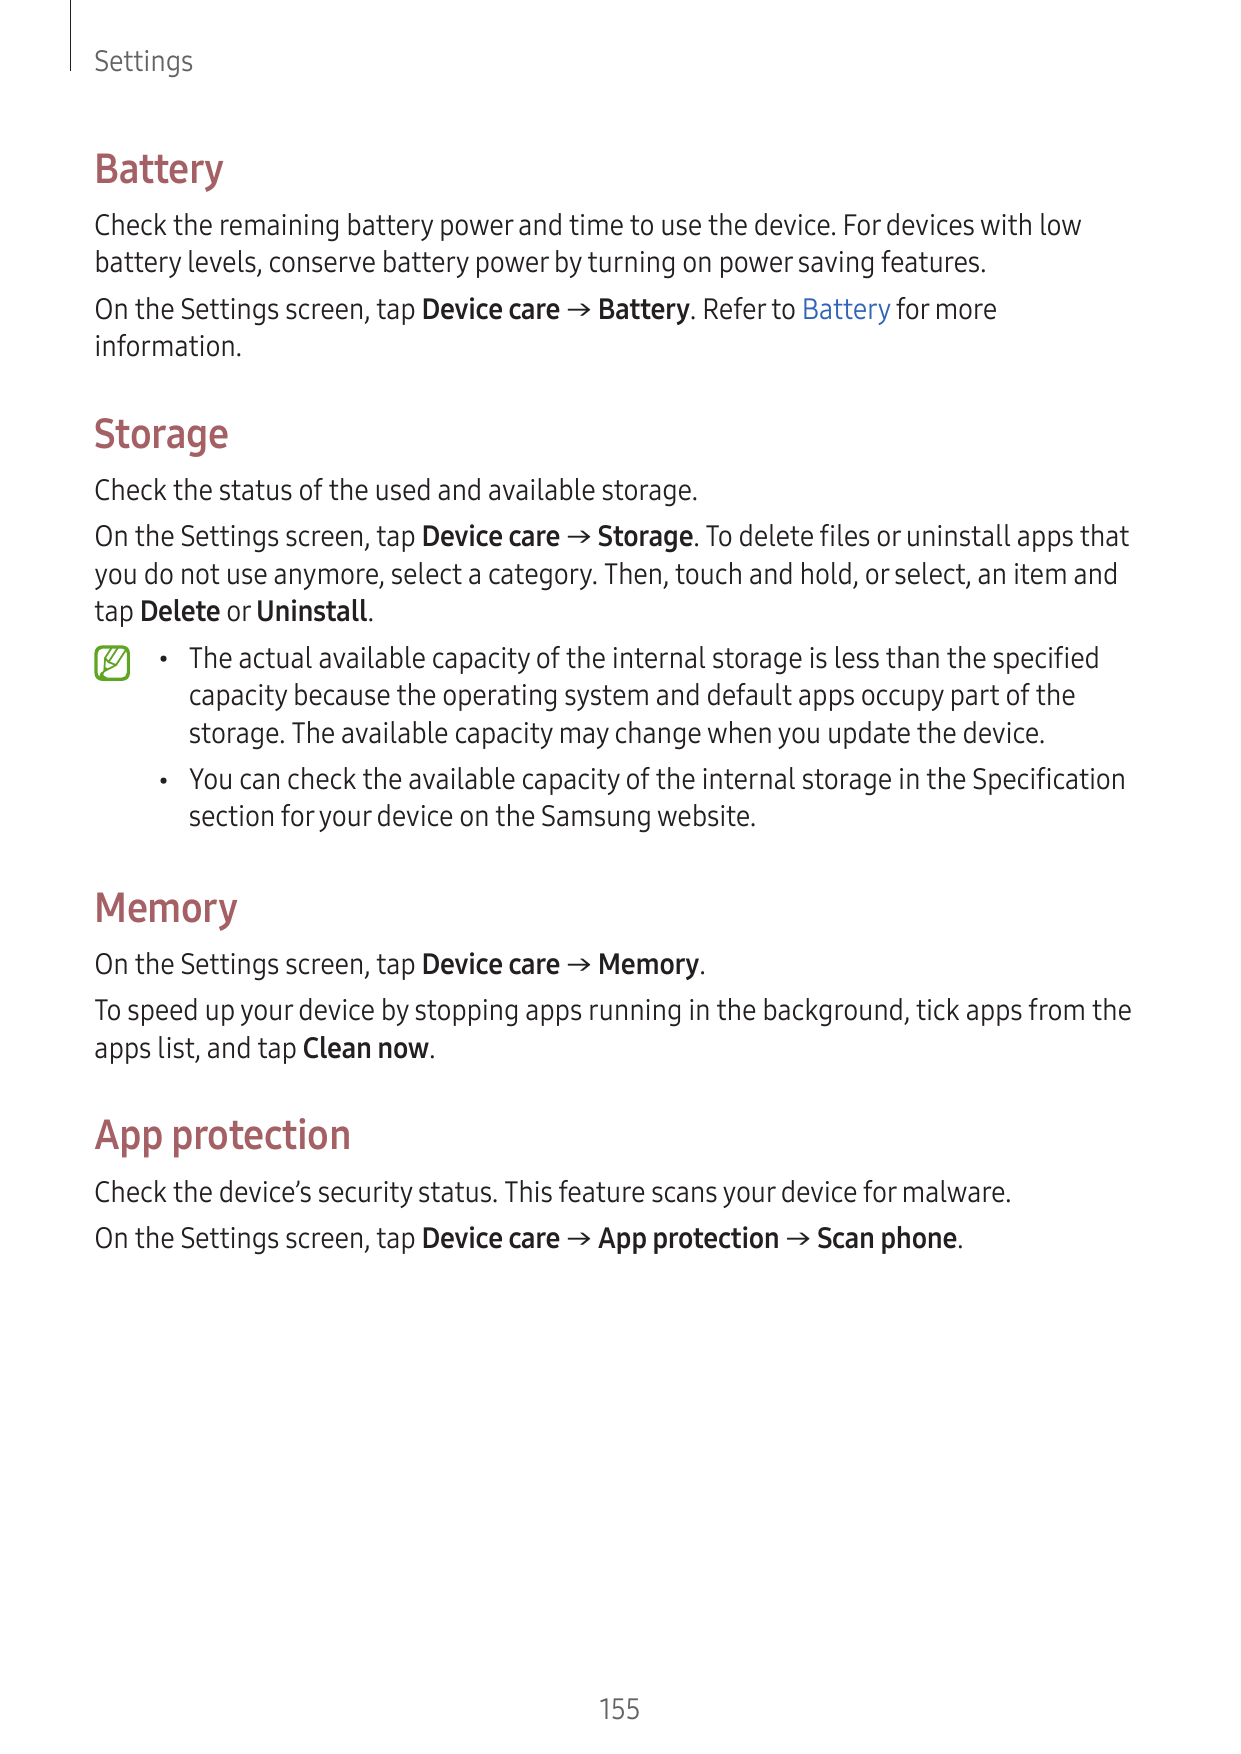 SettingsBatteryCheck the remaining battery power and time to use the device. For devices with lowbattery levels, conserve batter